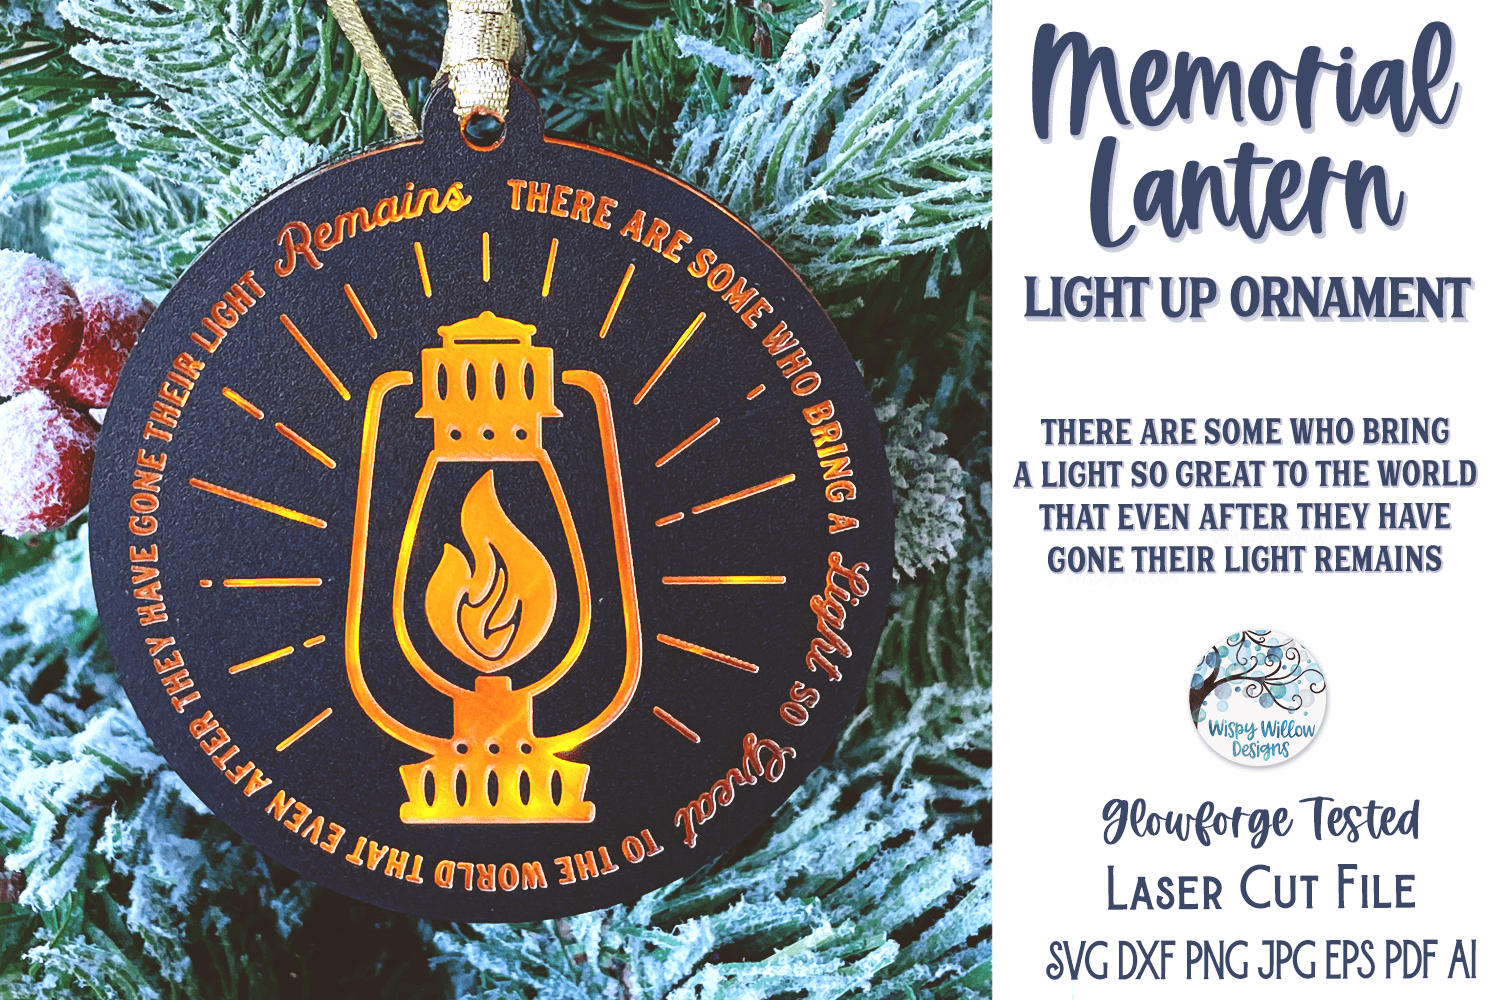 Memorial Lantern Light Up Christmas Ornament for Glowforge Laser Wispy Willow Designs Company